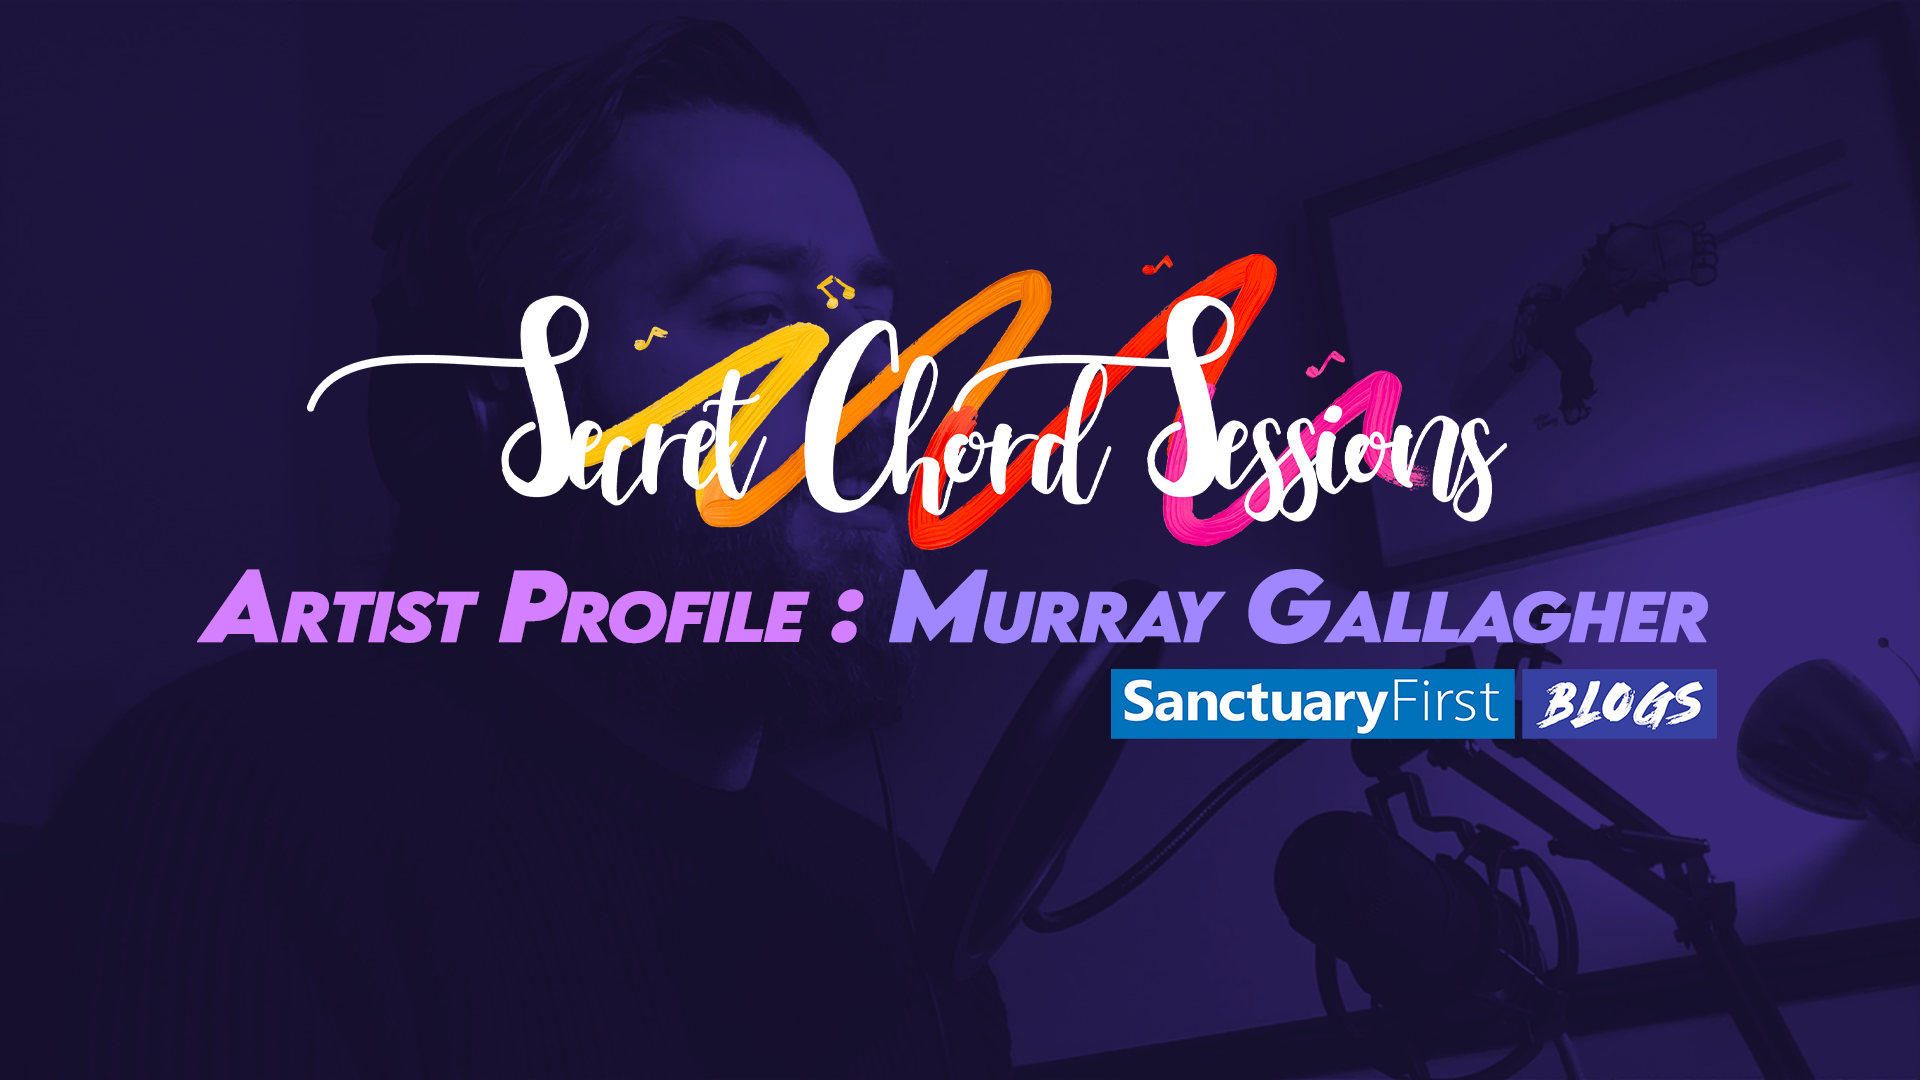 Secret Chord Sessions Artist Profile: Murray Gallagher